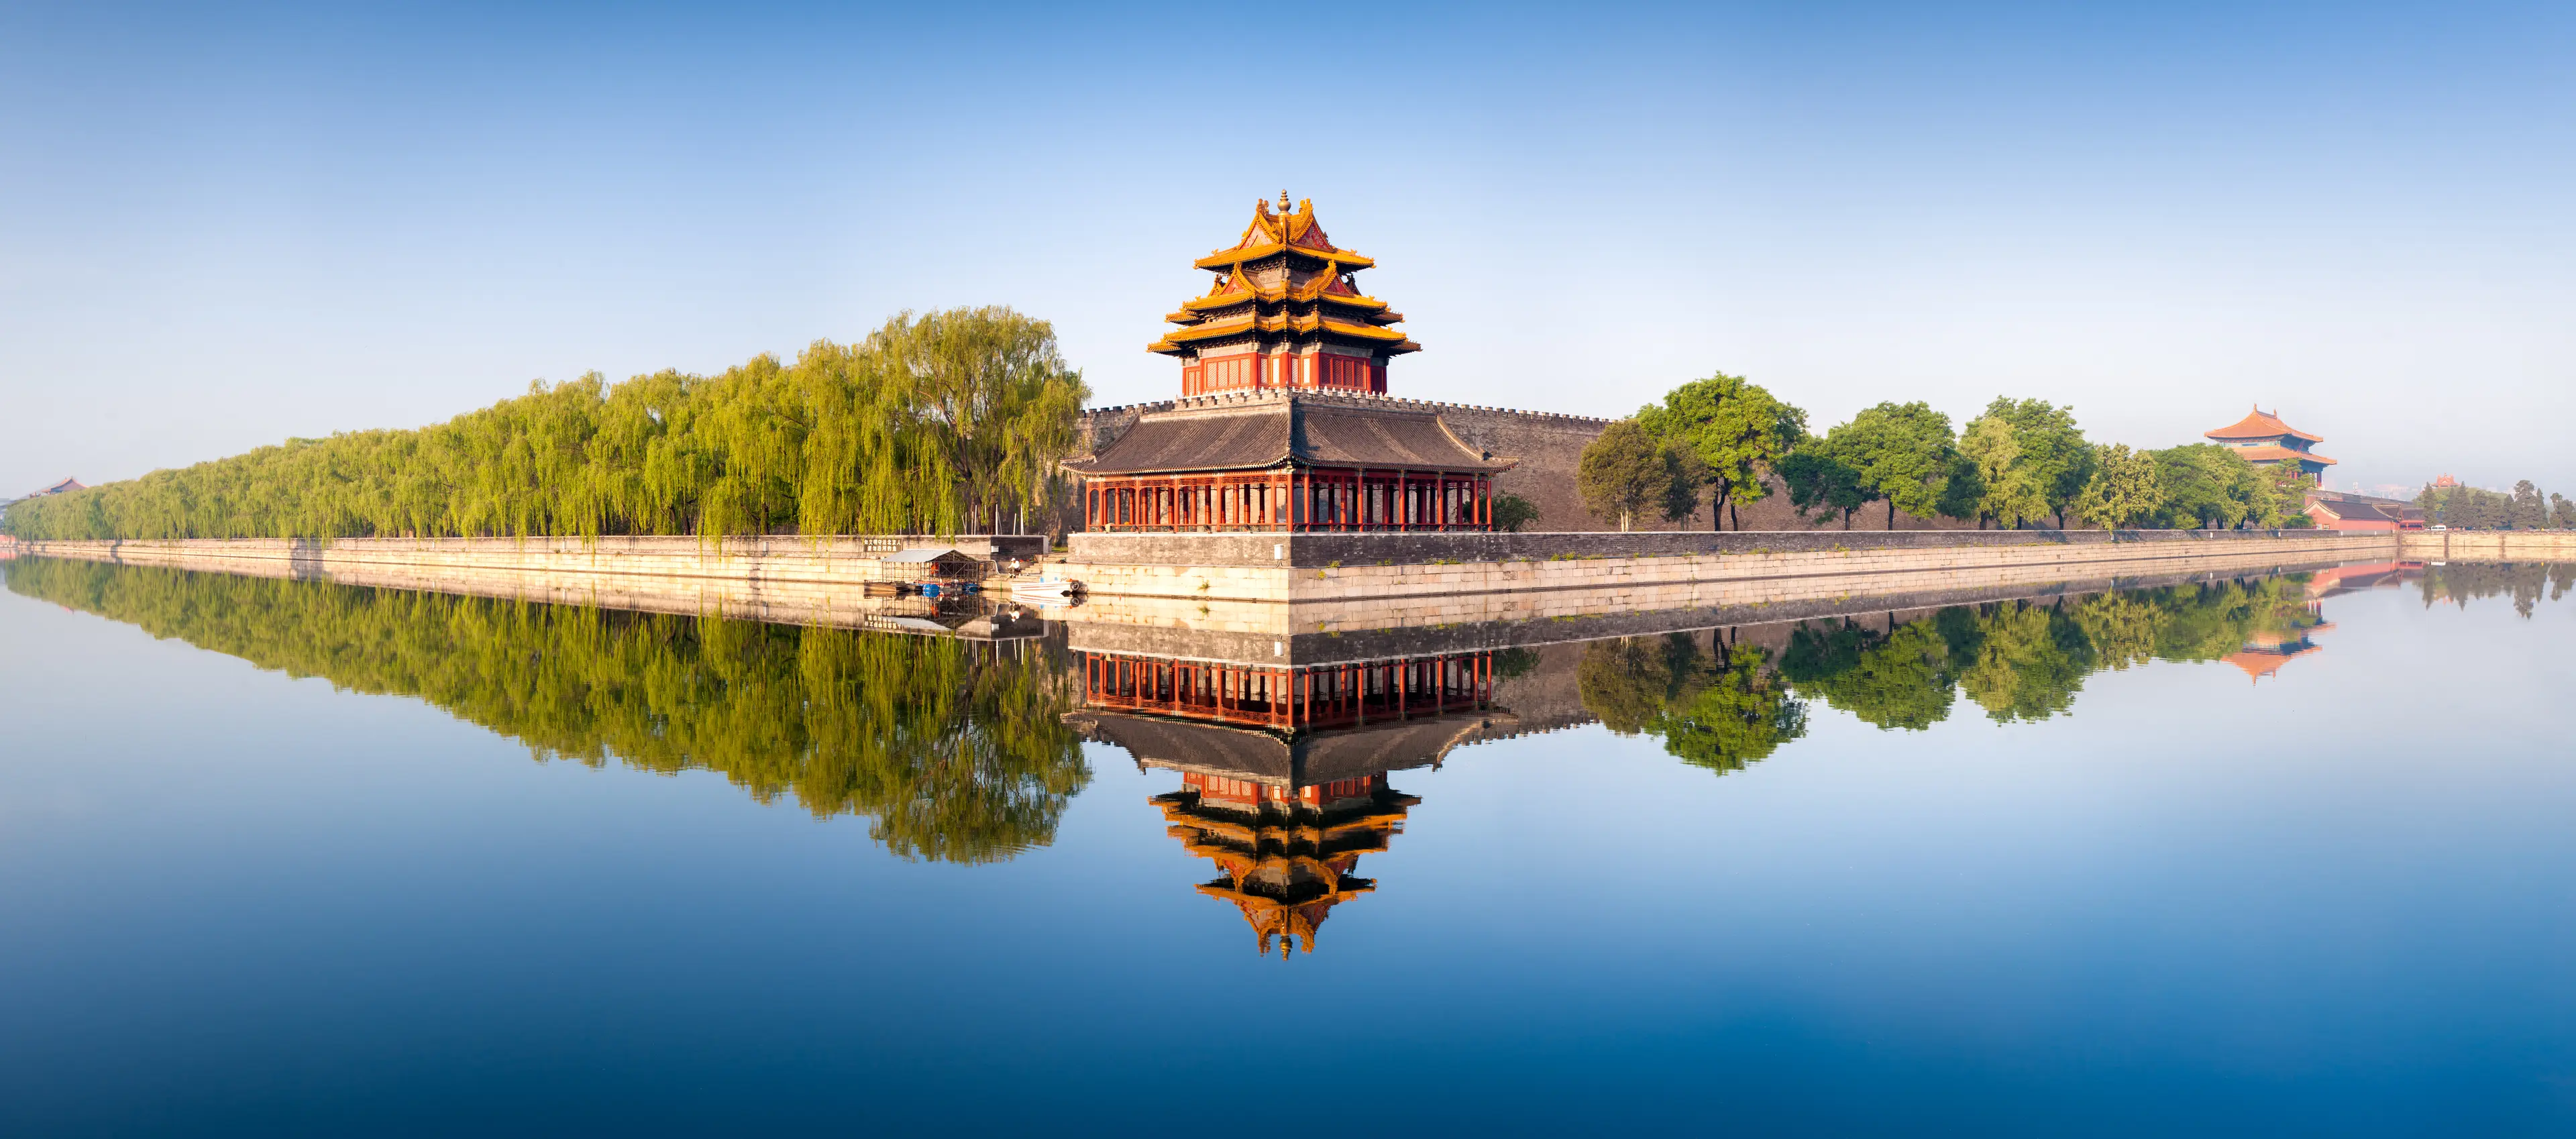 4-Day Solo Local Experience in Beijing: Food, Sights & Shopping